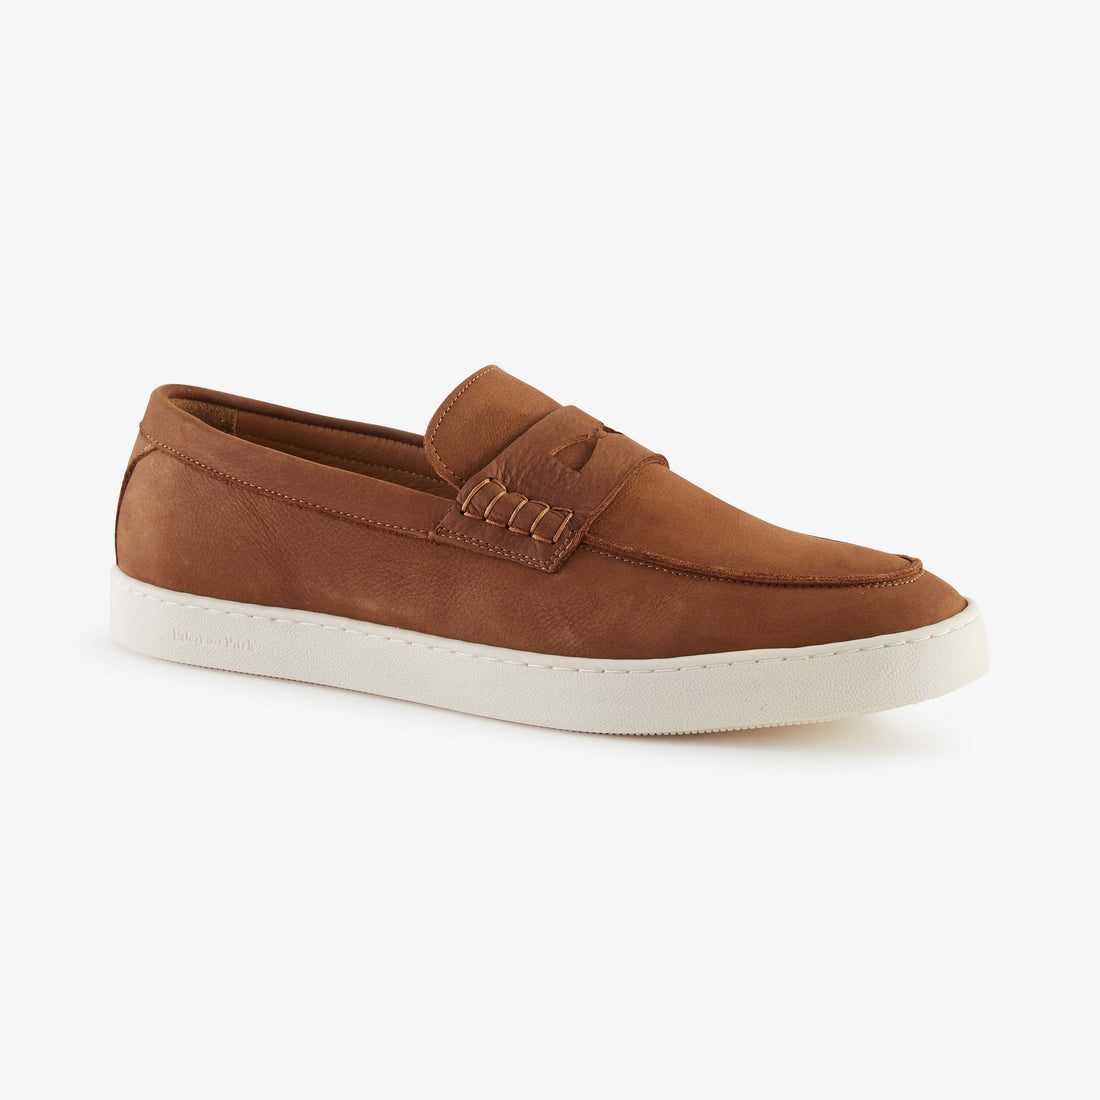 brown-moccasins-in-grained-leather_e23chsmo0004_mam3_01